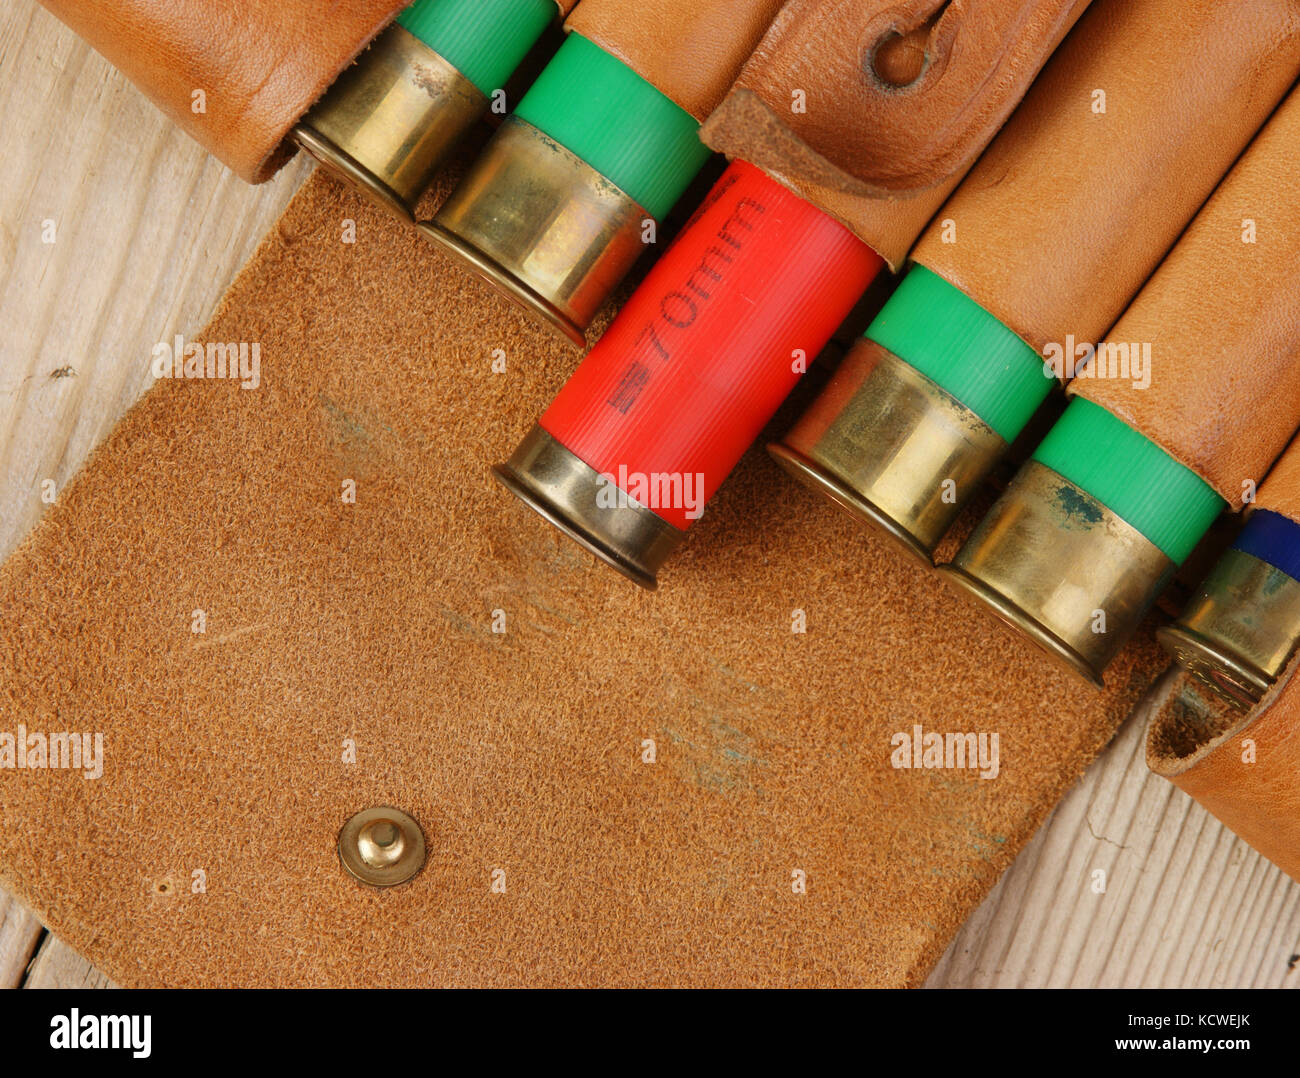 Old hunting cartridges and bandoleer on a wooden table Stock Photo